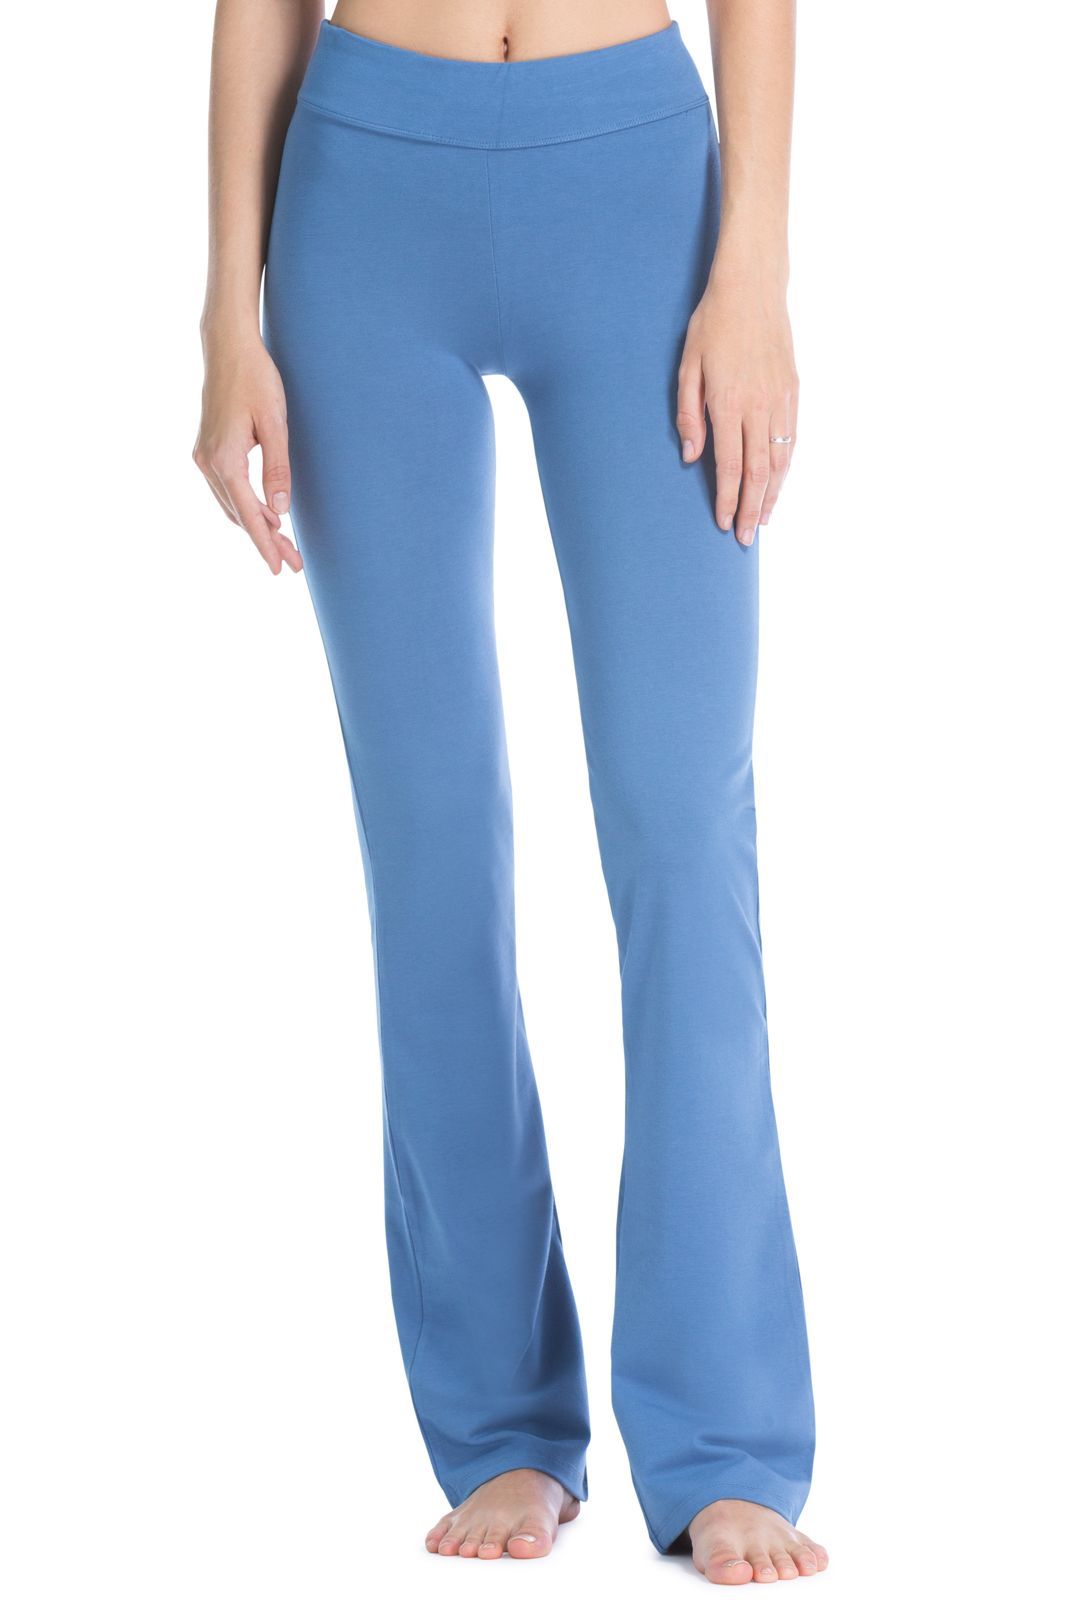 Low rise yoga pants bootcut pants flare bottom exercise pants casual pants  with 34” long inseam